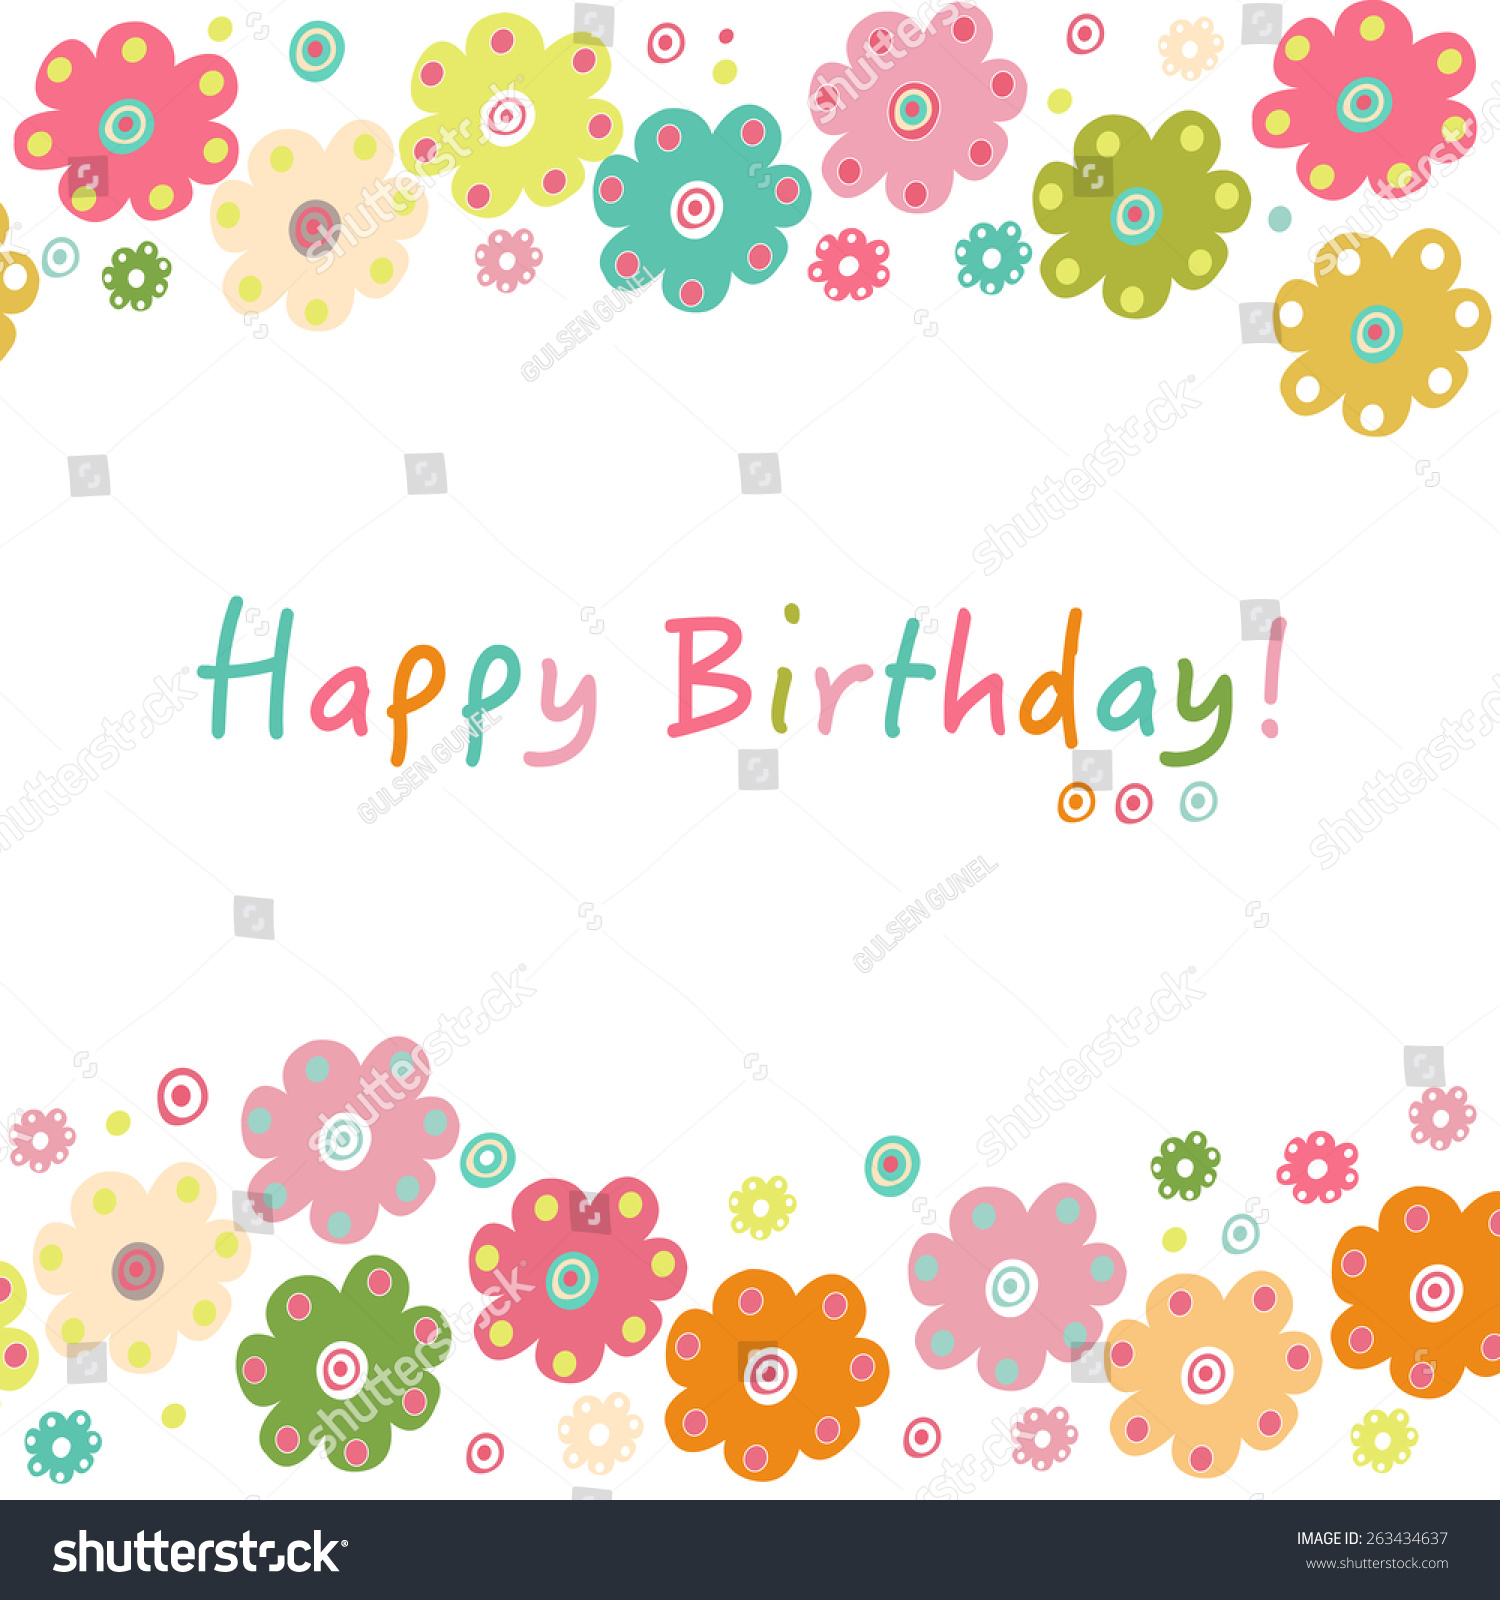 Happy Birthday Greeting Card With Colorful Flowers Stock Vector ...